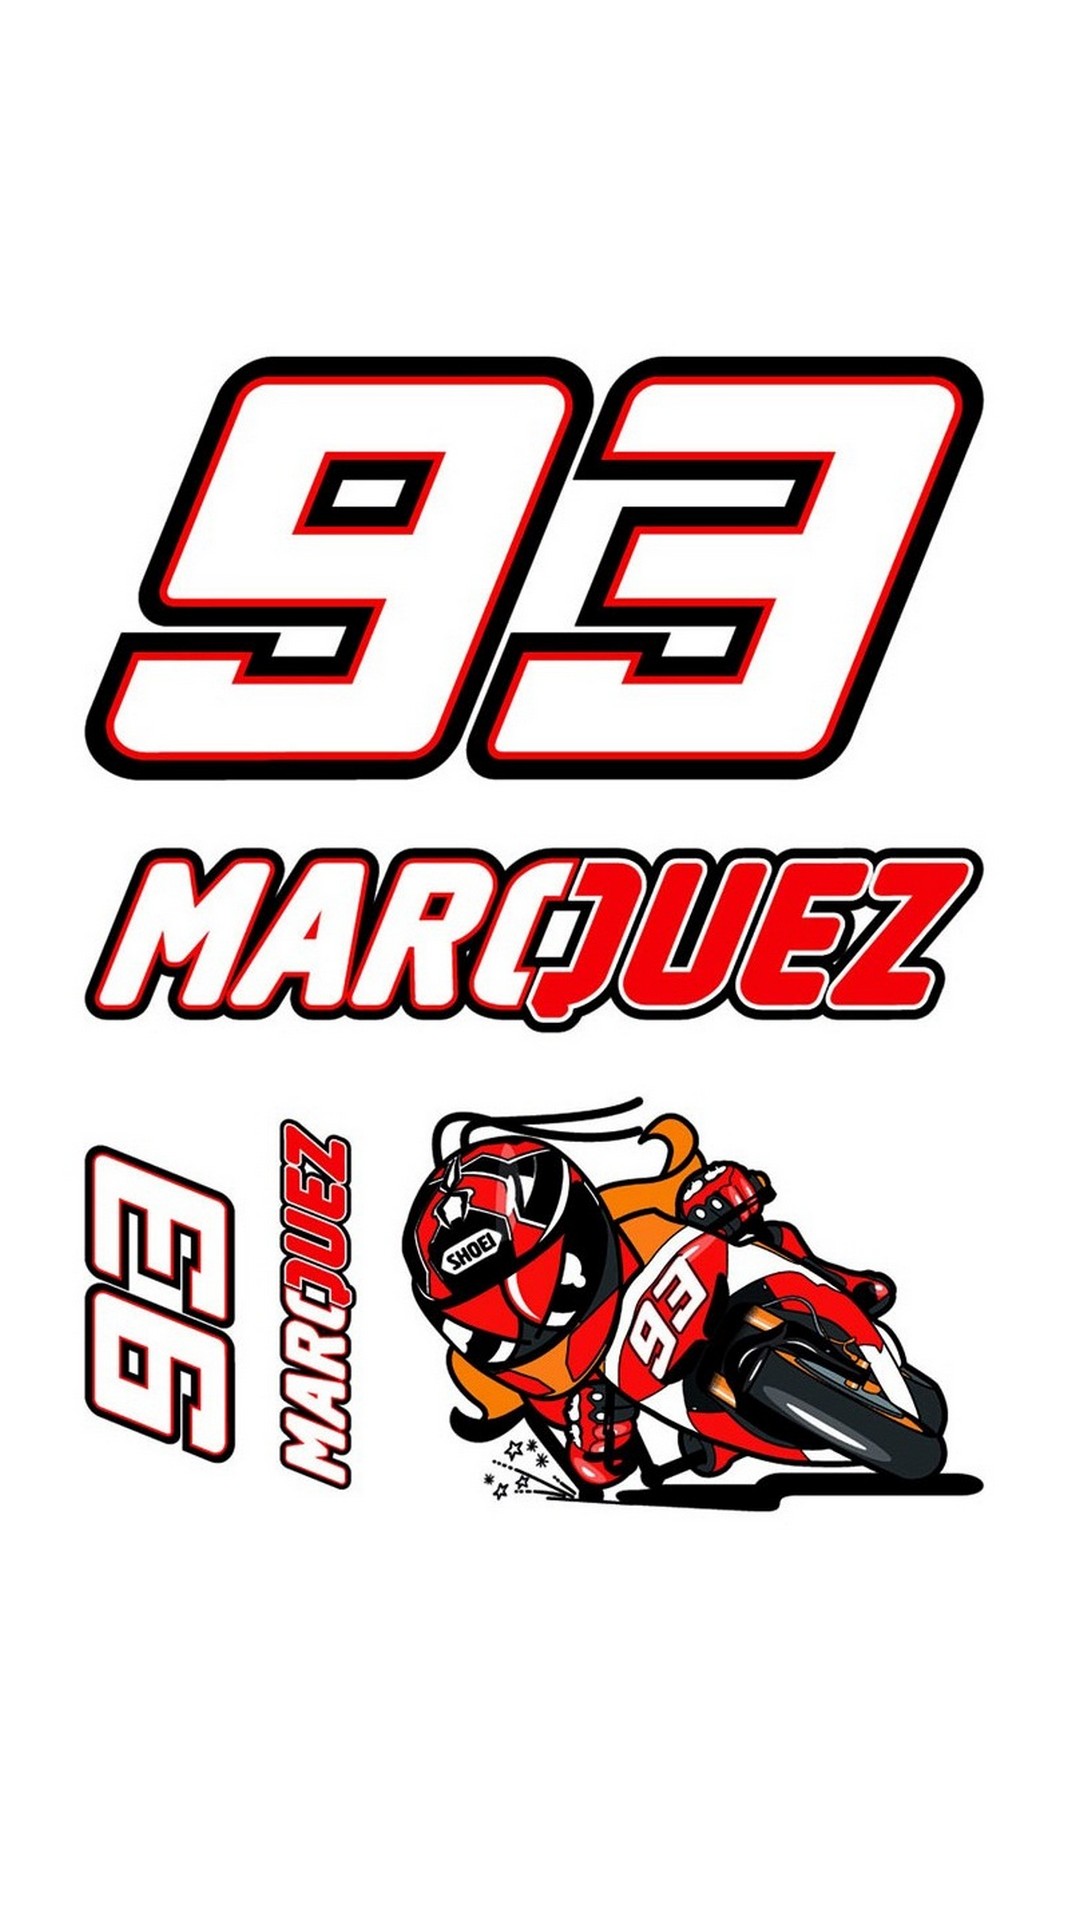 Marc Marquez Wallpaper For iPhone